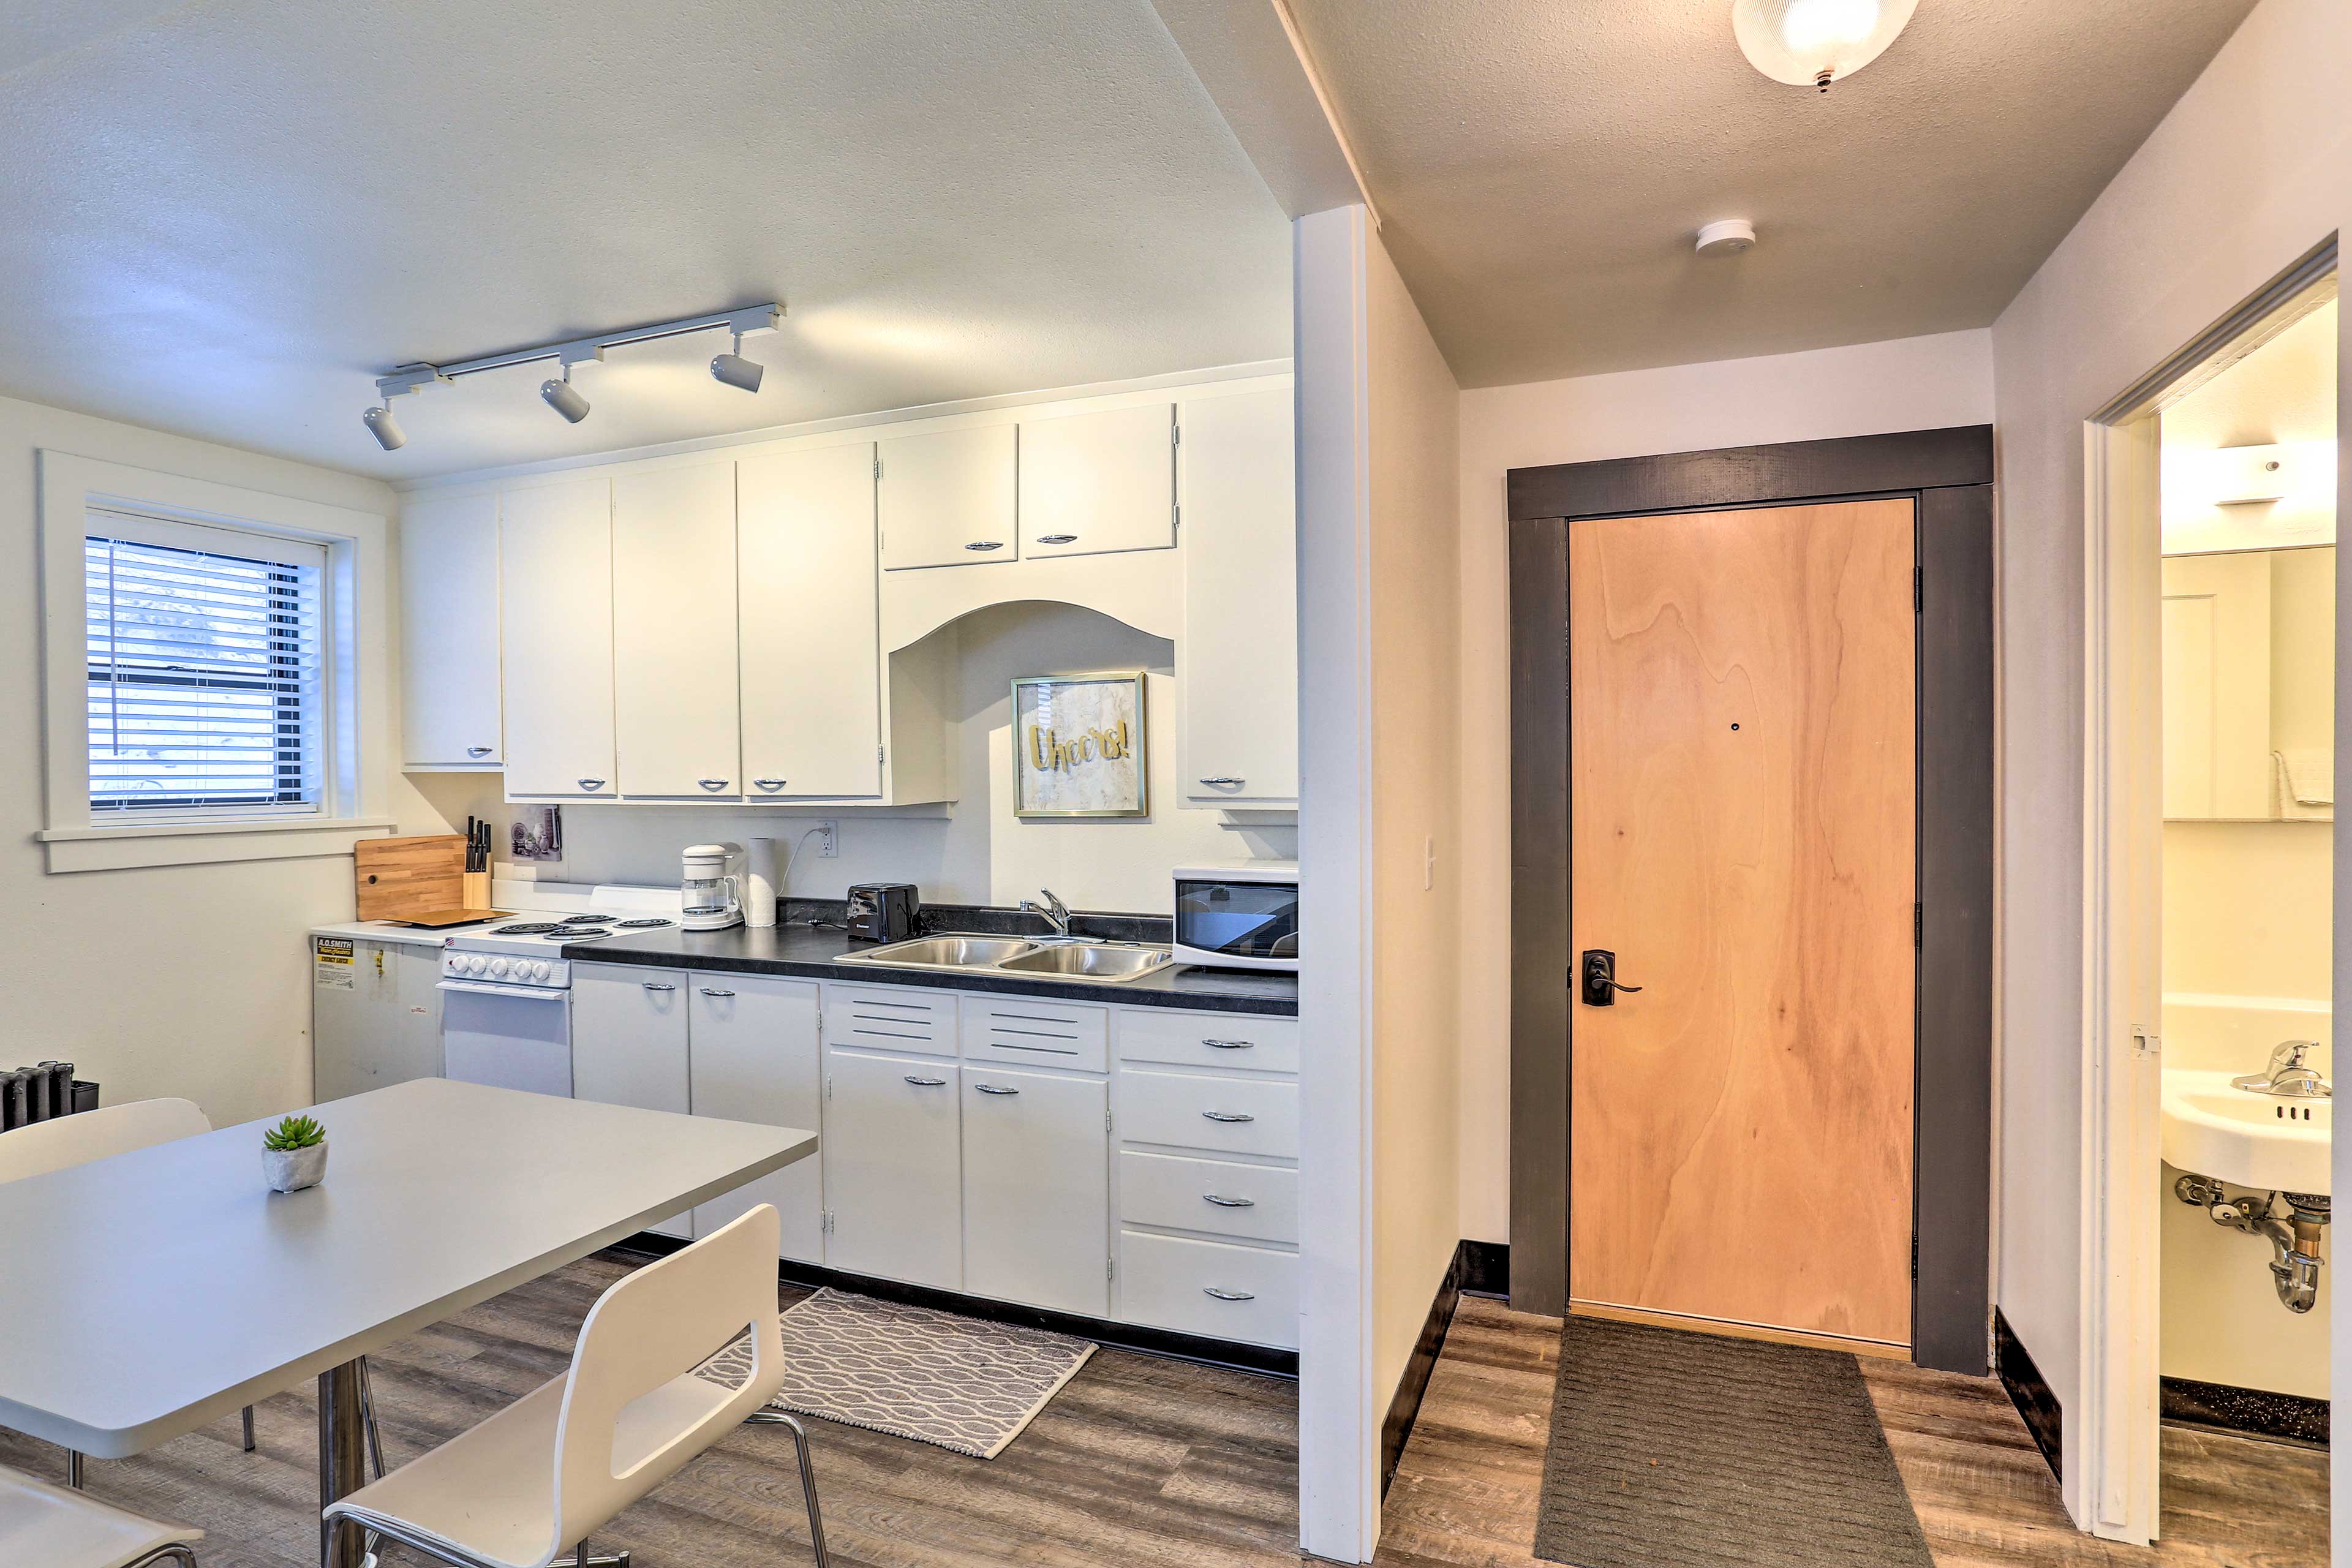 Upscale Apt at The Lofts in Historic Downtown Lead